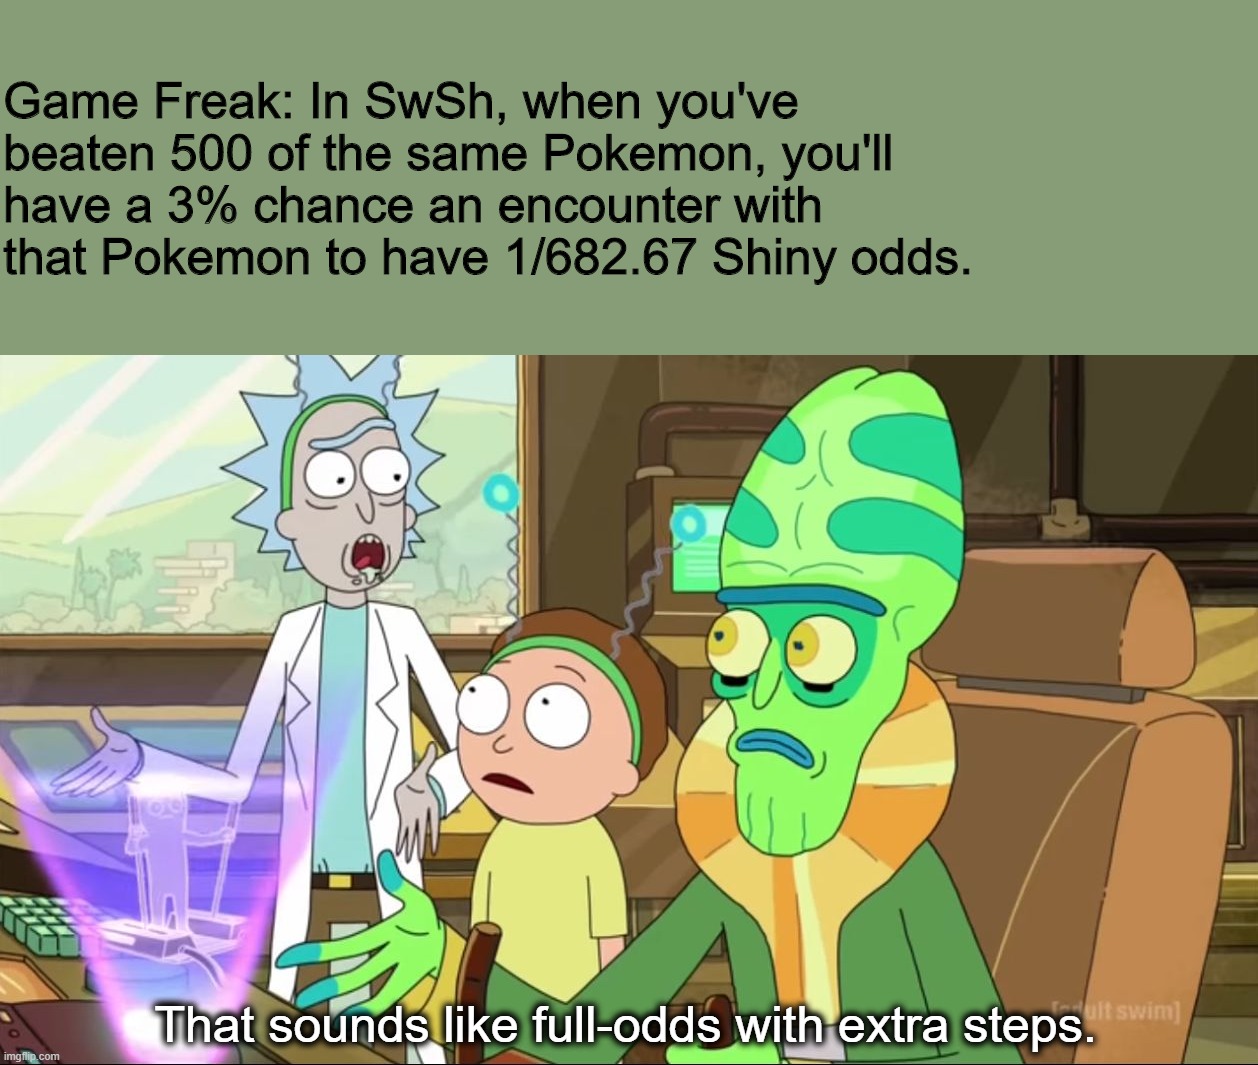 rick and morty-extra steps | Game Freak: In SwSh, when you've beaten 500 of the same Pokemon, you'll have a 3% chance an encounter with that Pokemon to have 1/682.67 Shiny odds. That sounds like full-odds with extra steps. | image tagged in rick and morty-extra steps | made w/ Imgflip meme maker